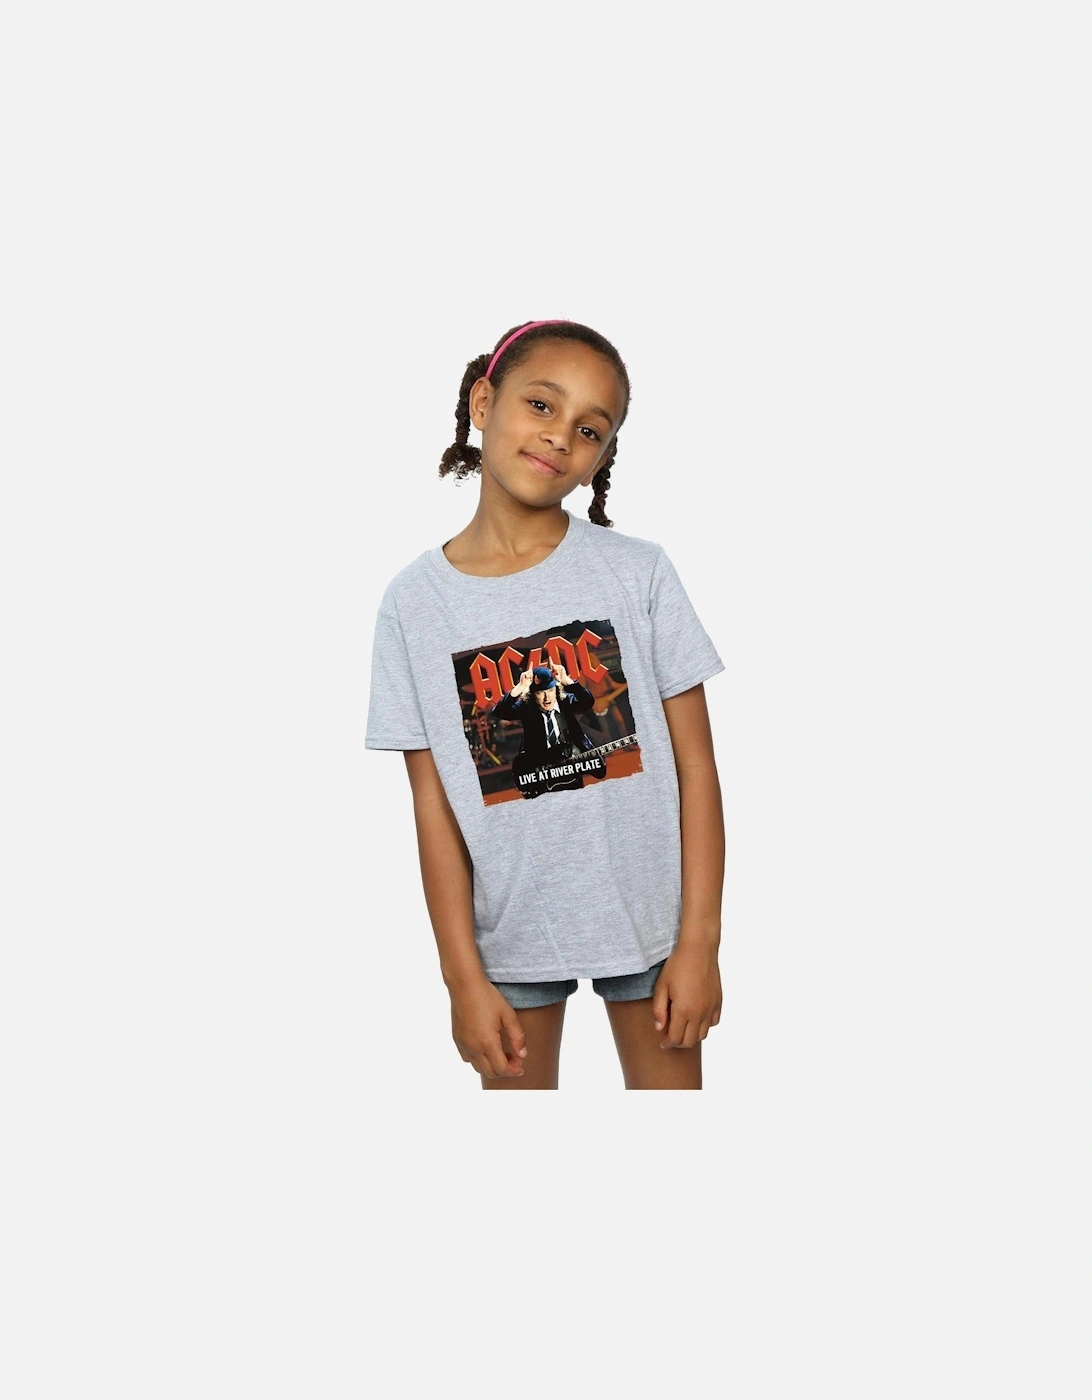 Girls Live At River Plate Columbia Records Cotton T-Shirt